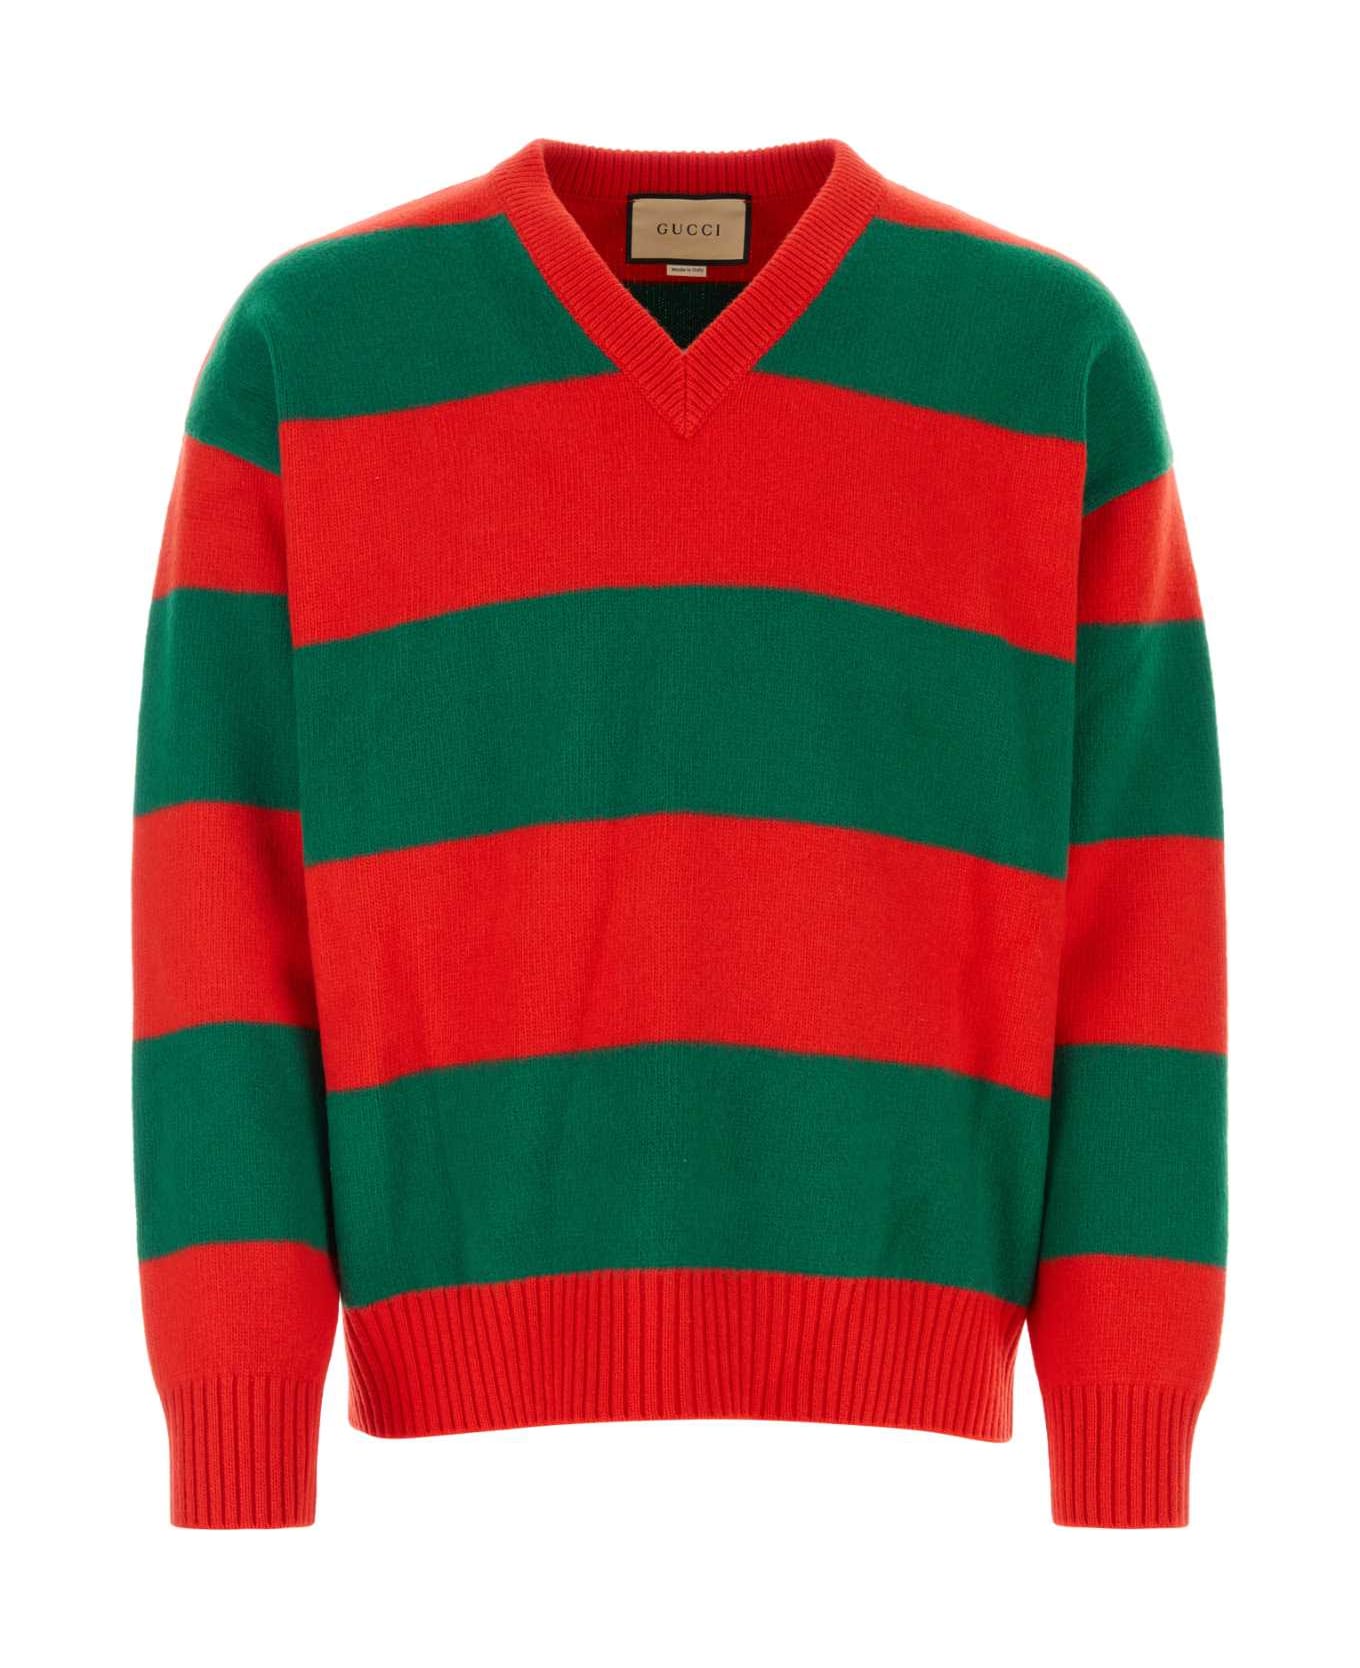 Gucci Embroidered Stretch Wool Blend Sweater - LIVEREDGREEN